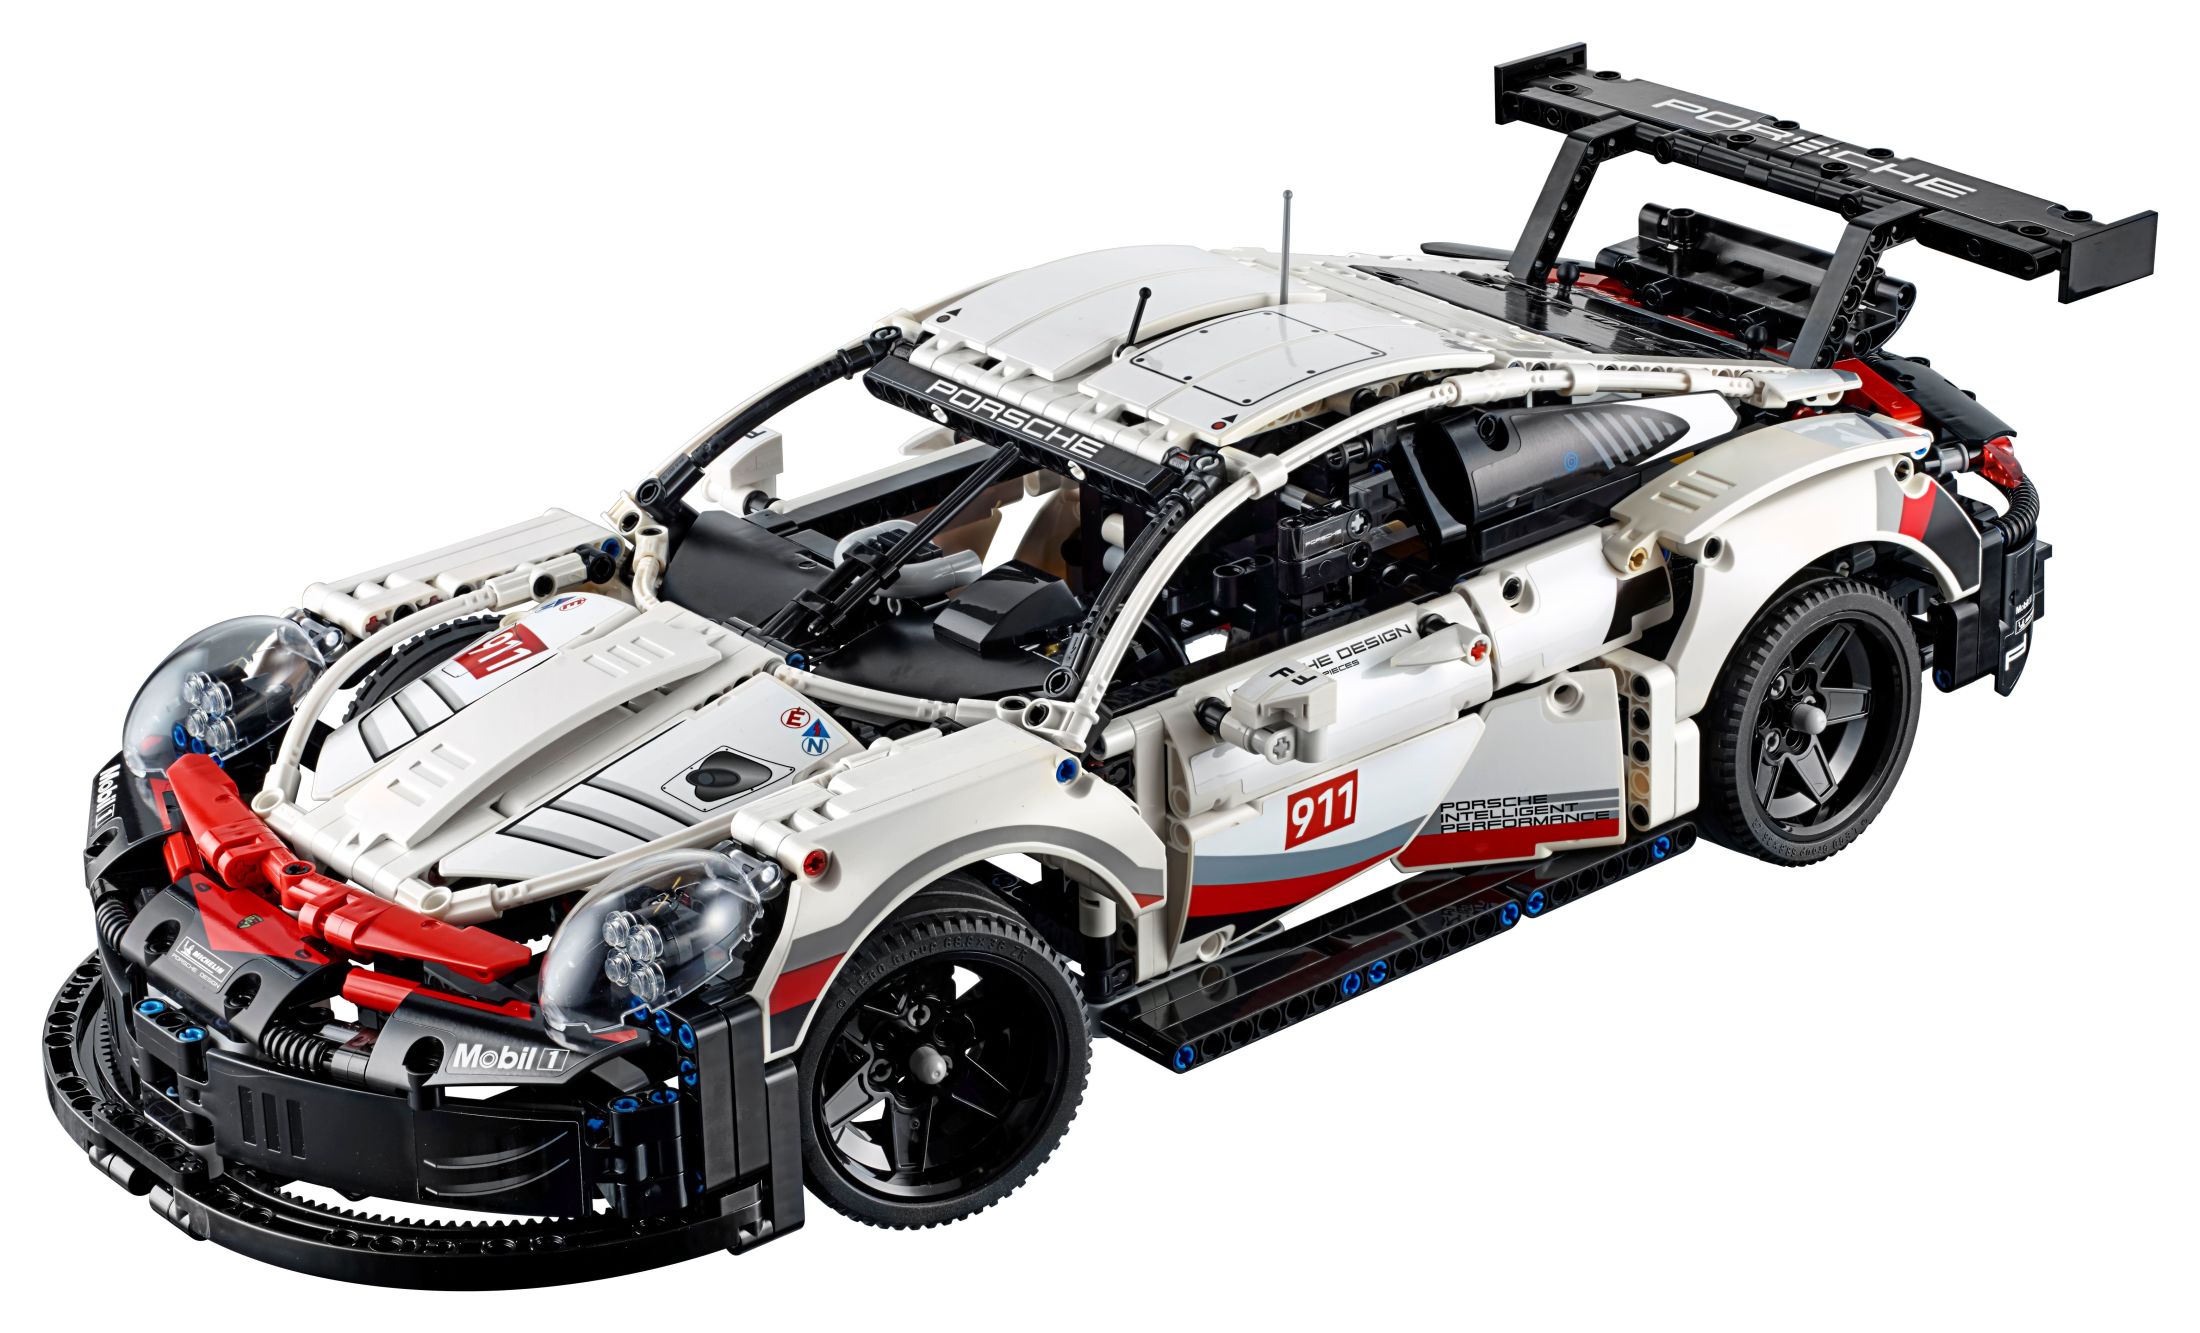 LEGO Technic Porsche 911 RSR Race Car Model Building Kit 42096, Advanced Replica, Exclusive Collectible Set, Gift for Kids, Boys & Girls - image 5 of 9